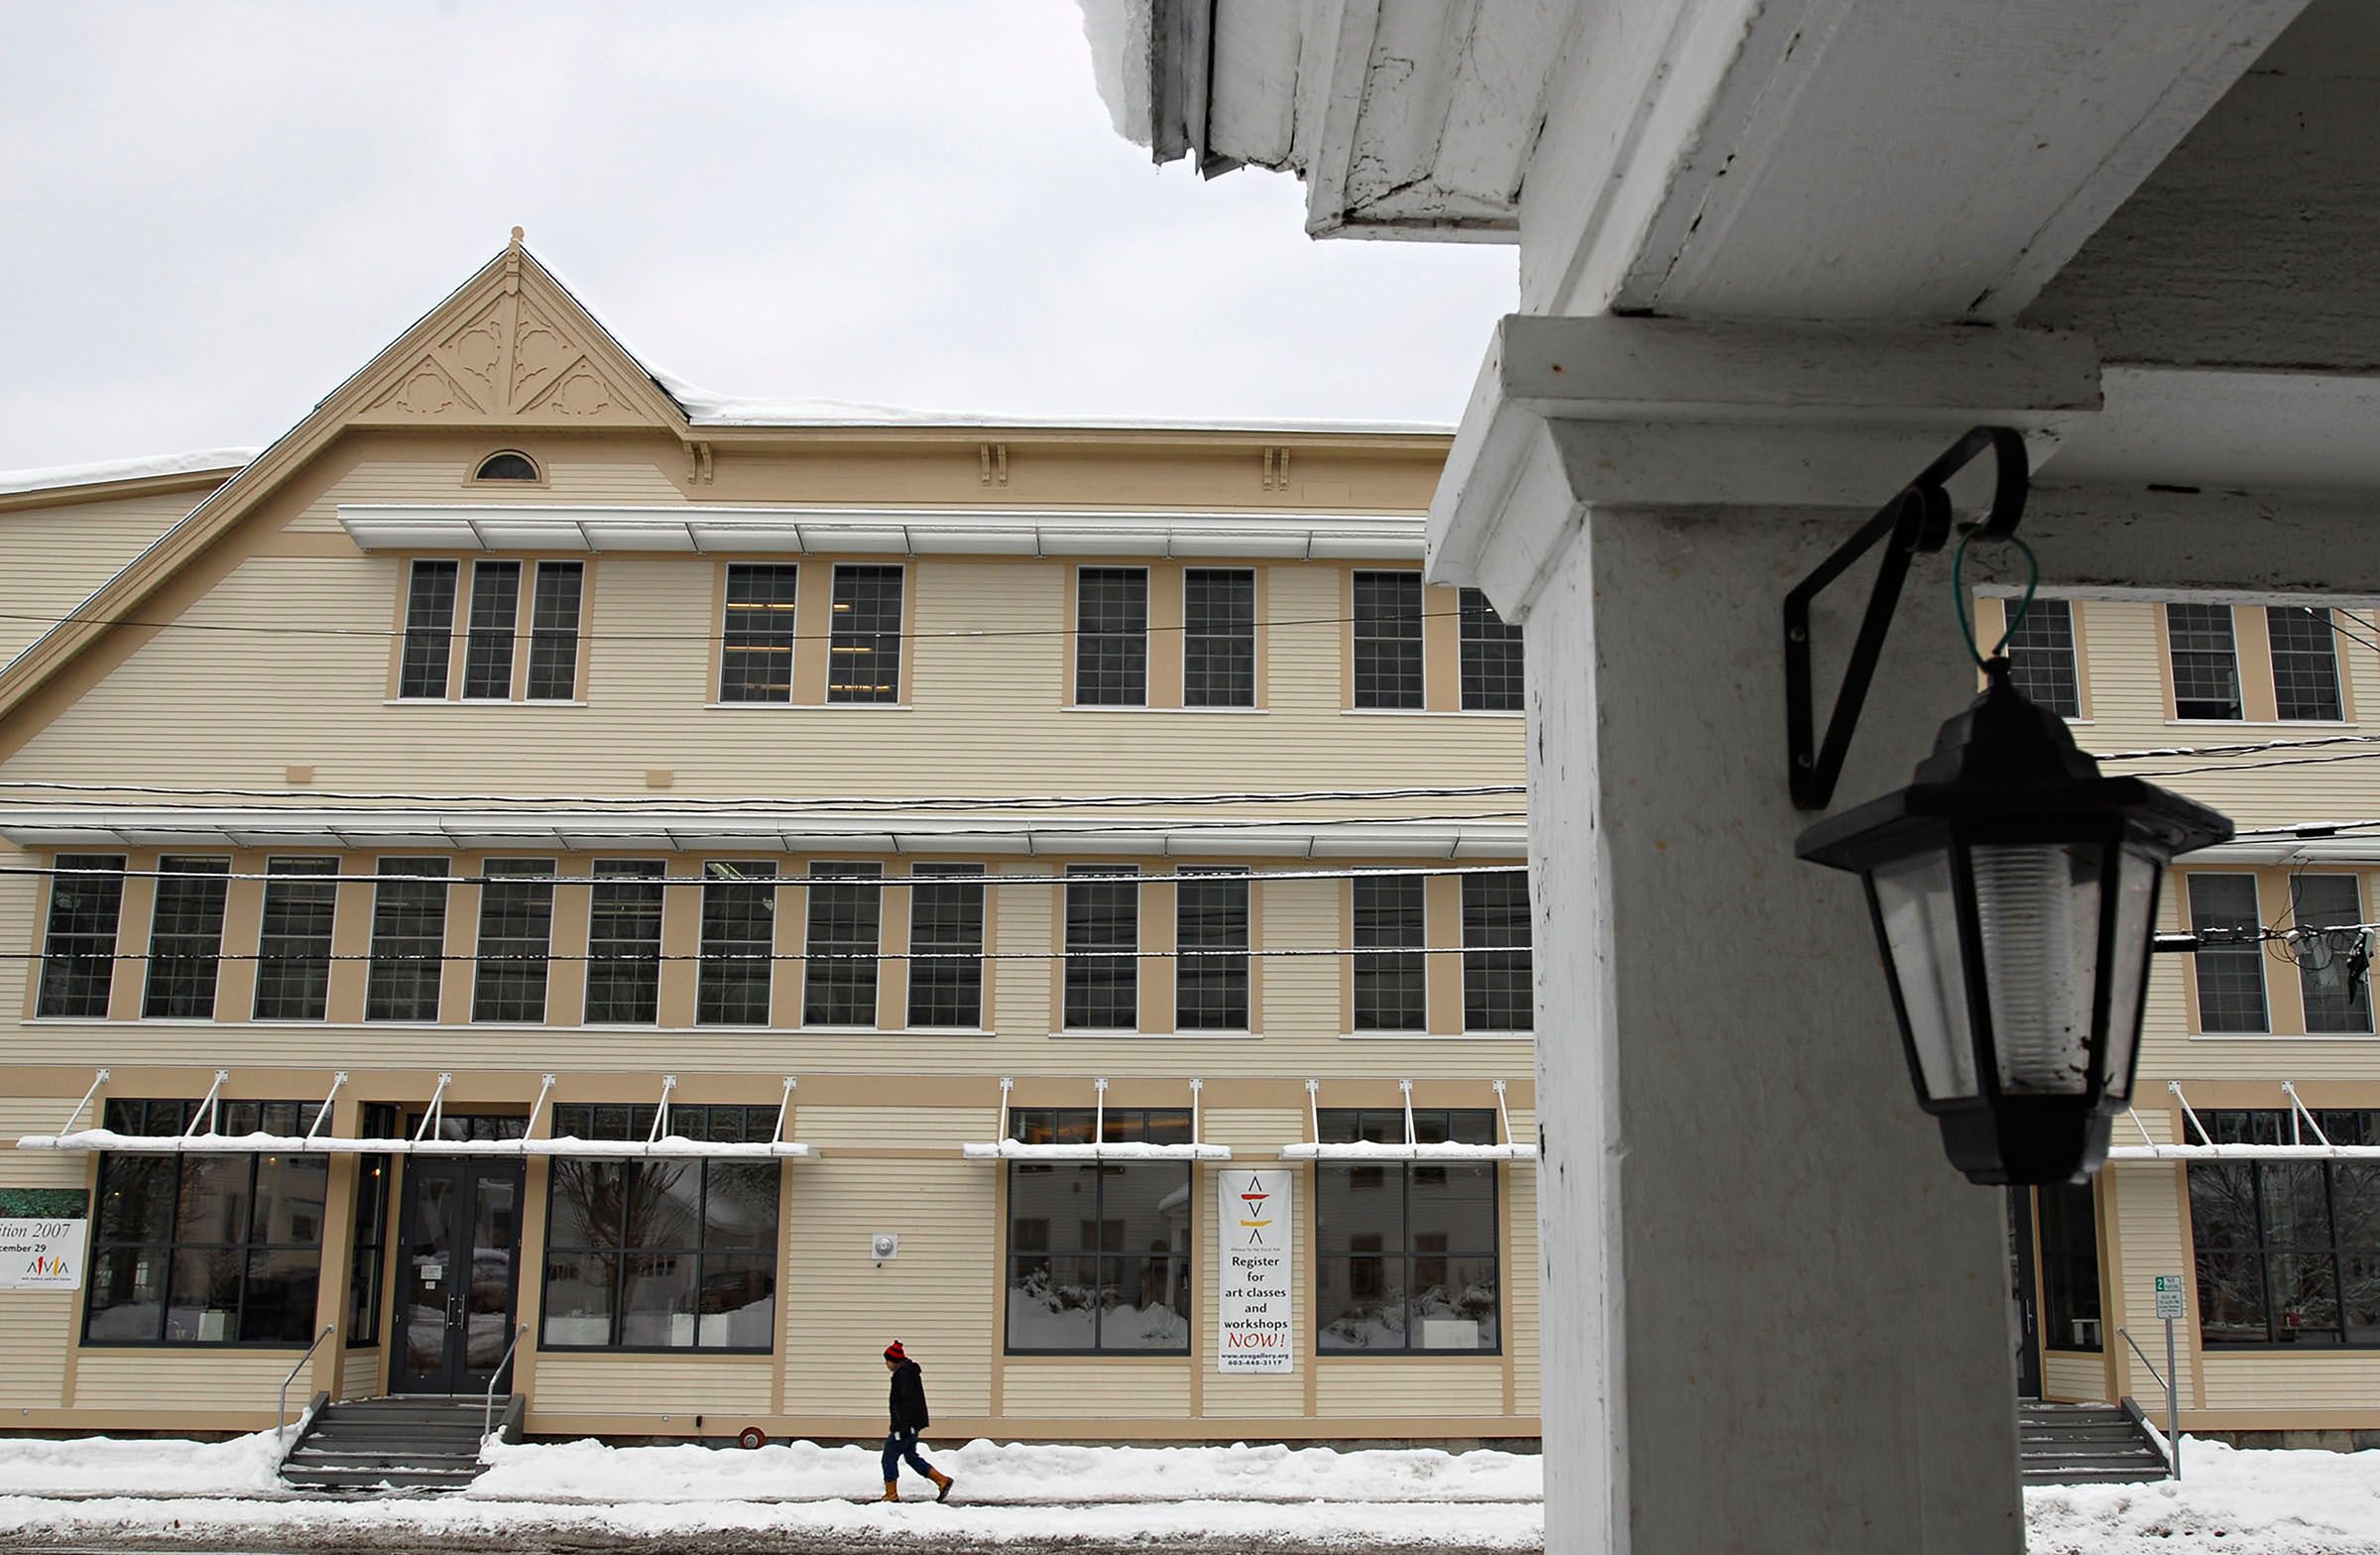 The facade of the newly-renovated AVA Gallery and Art Center in Lebanon, N.H., on Dec. 21, 2007. (Valley News - James M. Patterson) Copyright Valley News. May not be reprinted or used online without permission. Send requests to permission@vnews.com.